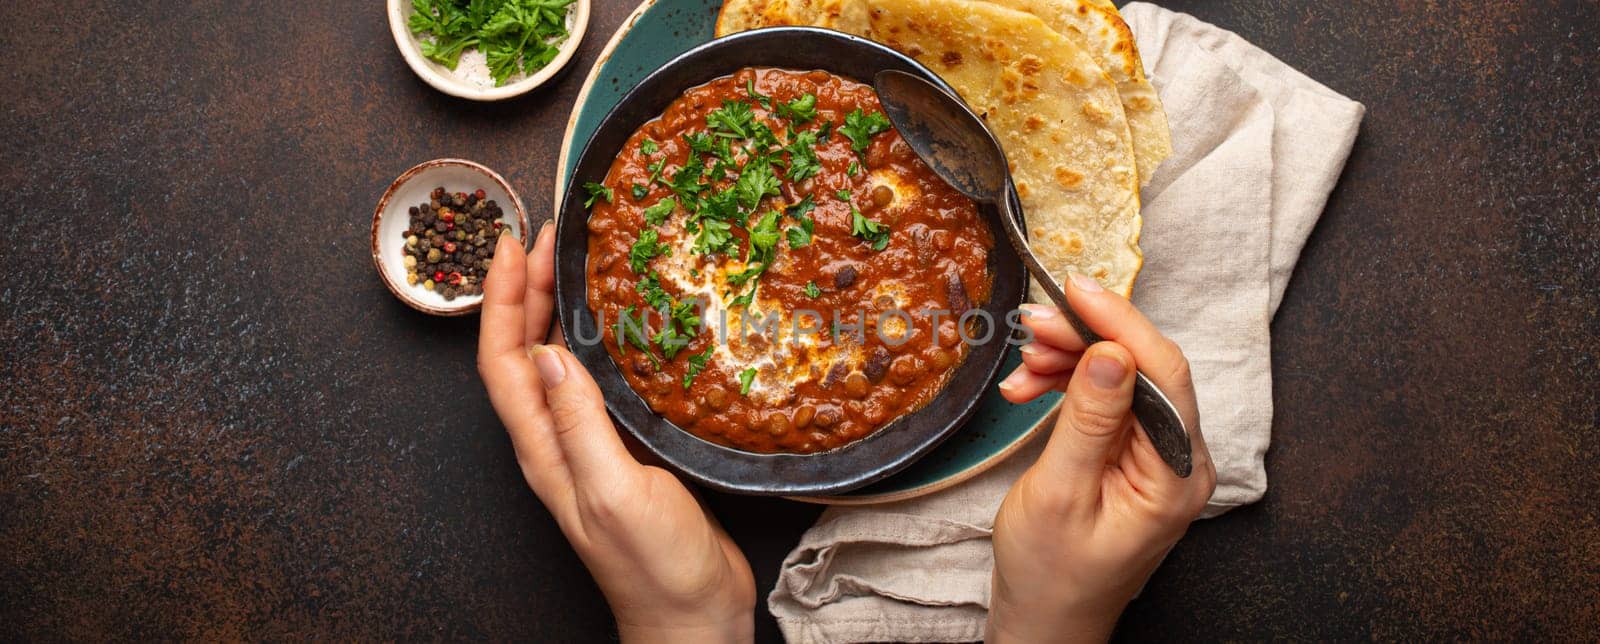 Female hands holding a bowl and eating traditional Indian Punjabi dish Dal makhani with lentils and beans served with naan flat bread, fresh cilantro on brown concrete rustic table top view by its_al_dente